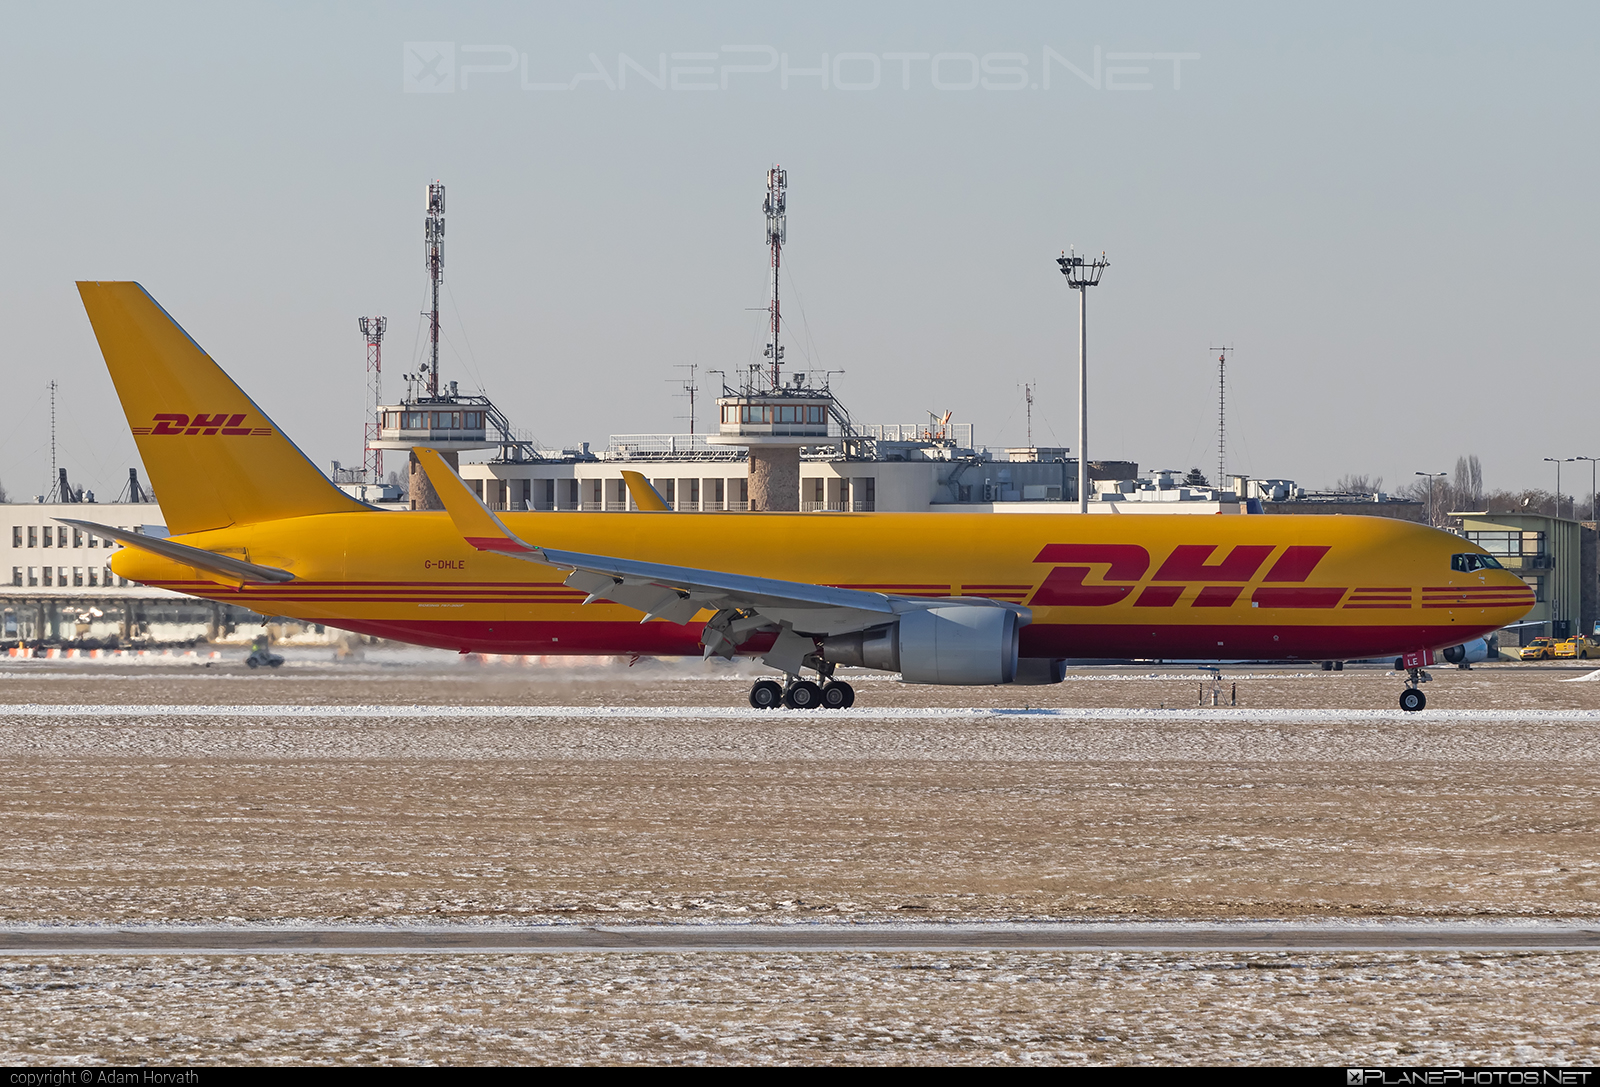 Boeing 767-300F - G-DHLE operated by DHL Air #b767 #b767f #b767freighter #boeing #boeing767 #dhl #dhlair